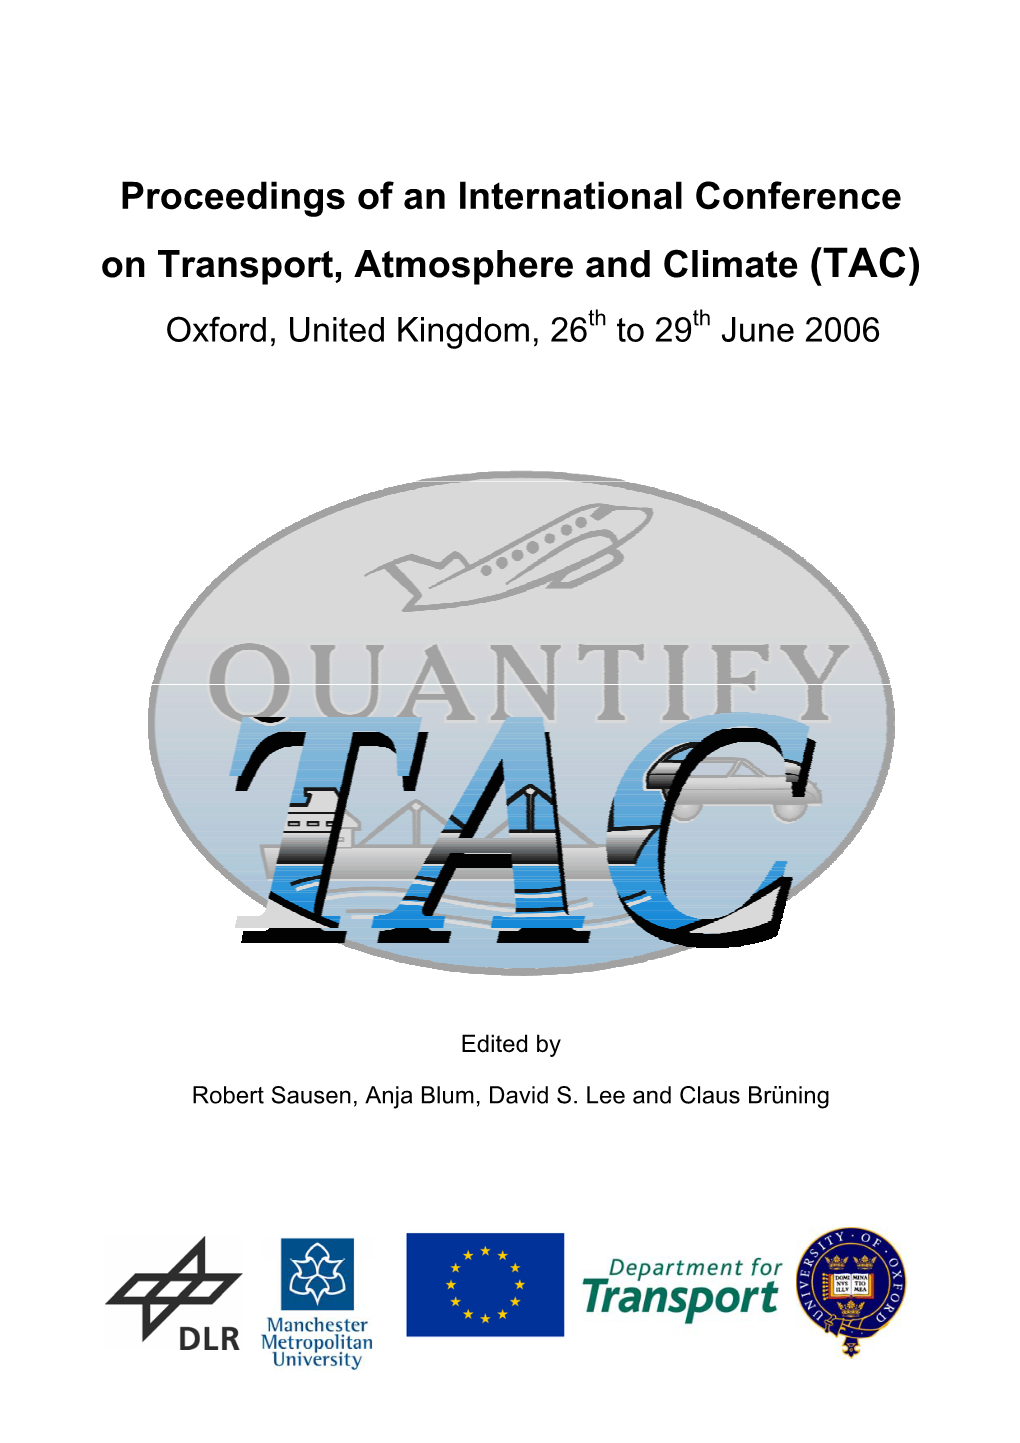 Proceedings of an International Conference on Transport, Atmosphere and Climate (TAC) Oxford, United Kingdom, 26Th to 29Th June 2006